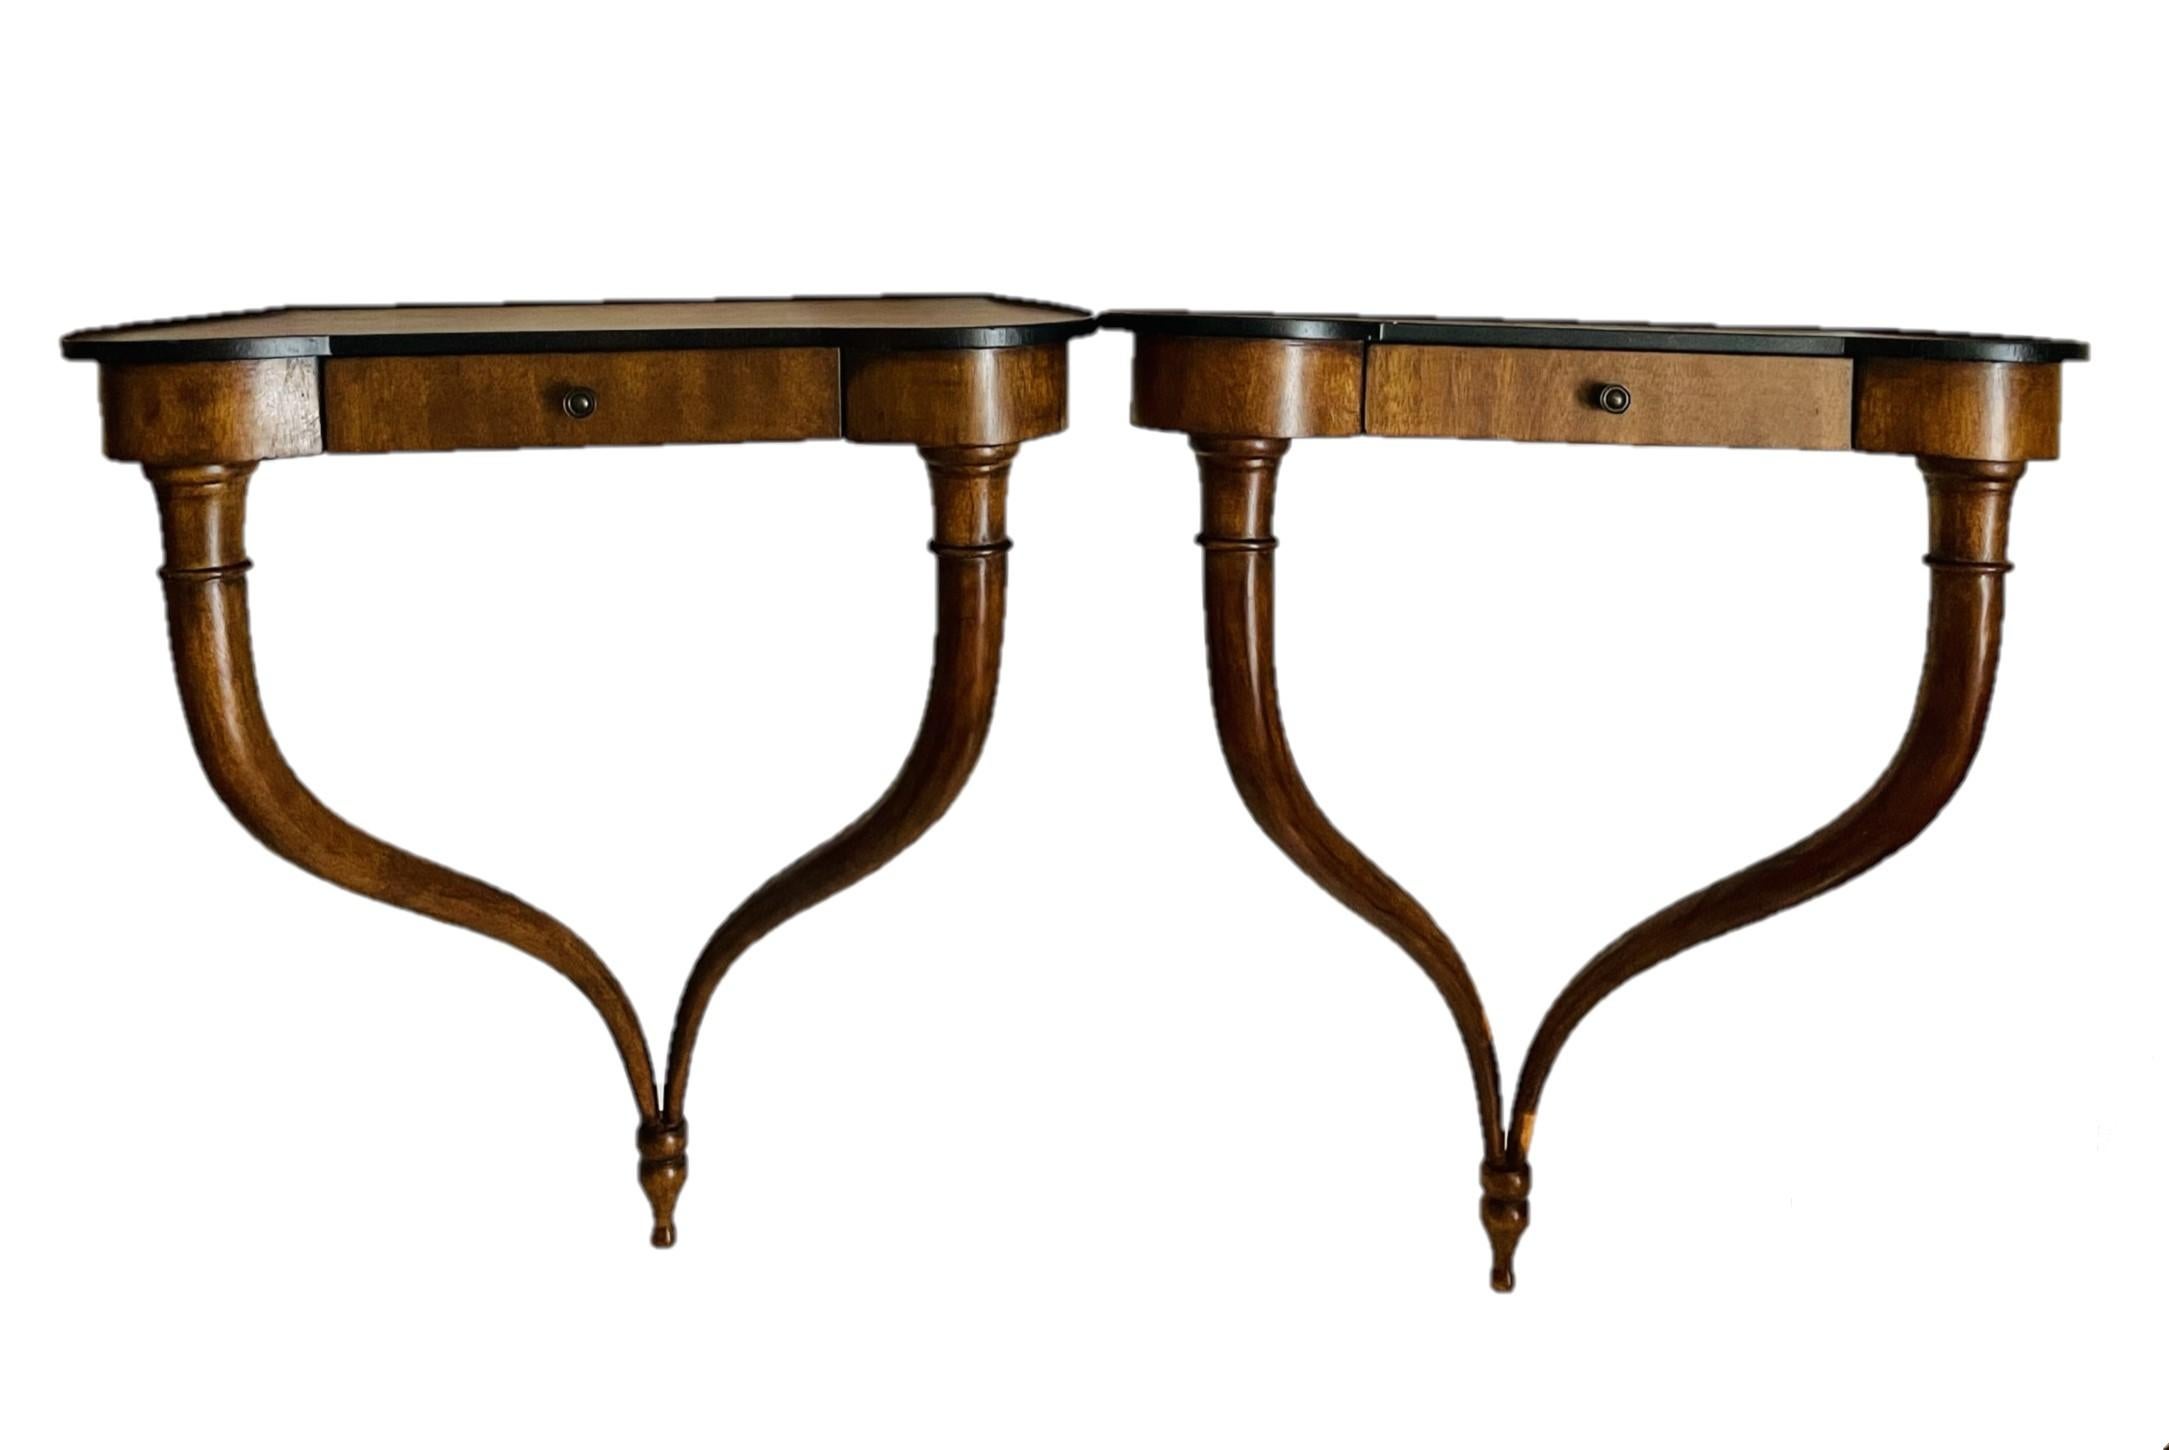 Pair Small Italian 1940s console tables in cherry wood, wall mounted shelves

Elegant vintage Italian serpentine carved cherry wood wall mounted console tables. Proportions are narrow and recall the classic Louis XV style as well as the work of